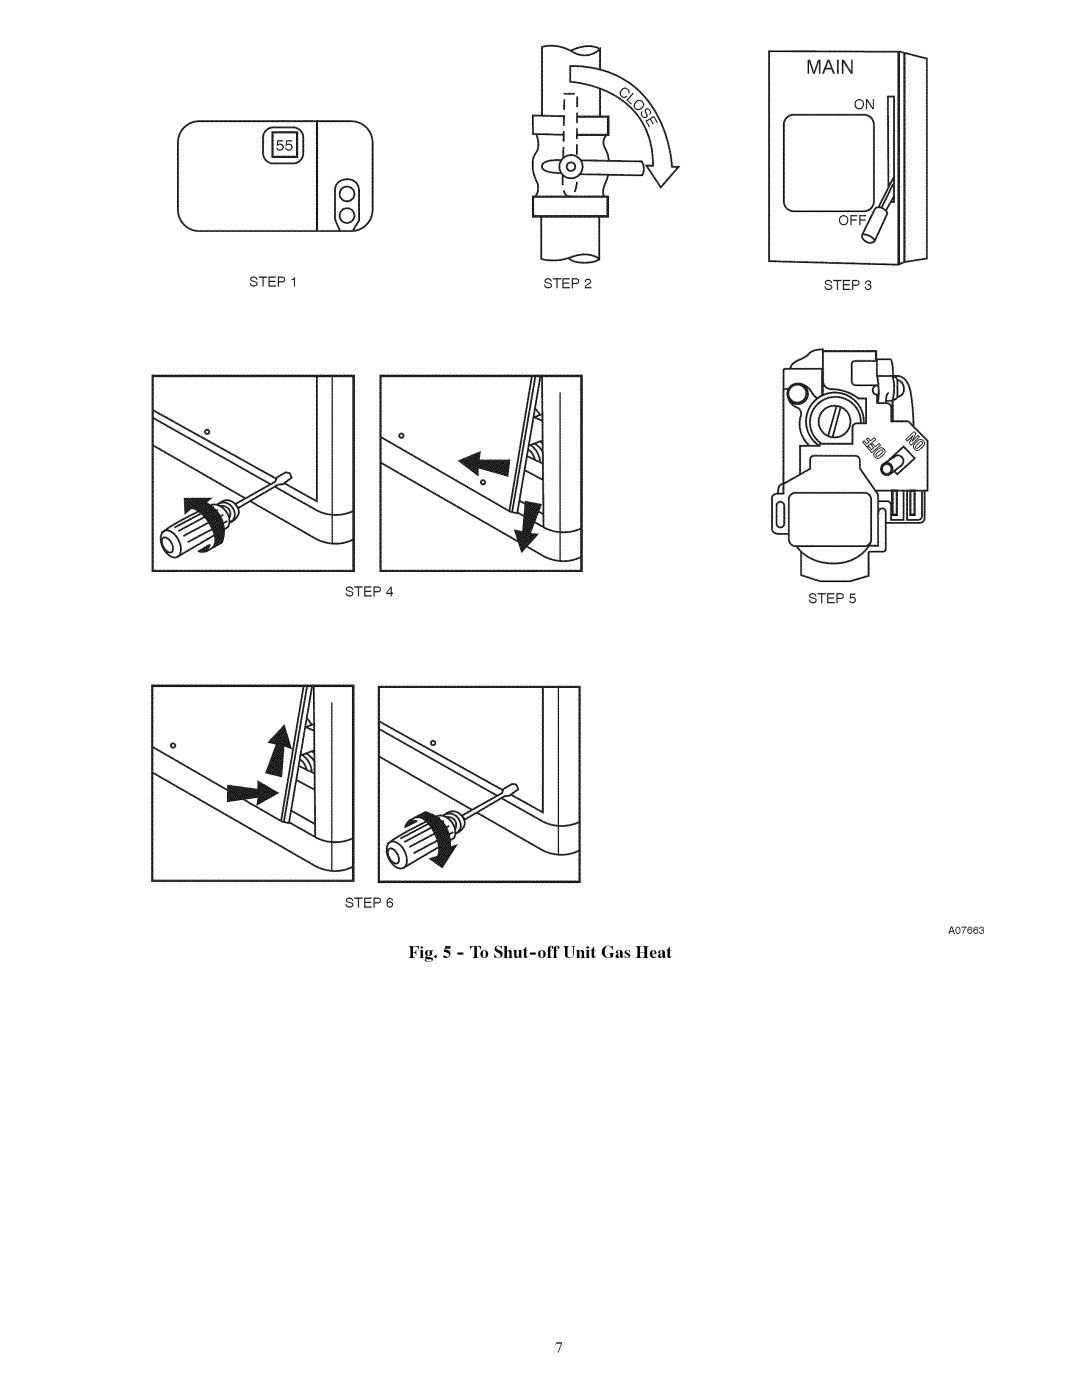 Carrier 48ES manual To Shut-offUnit Gas Heat, L Off, Step, A07663 